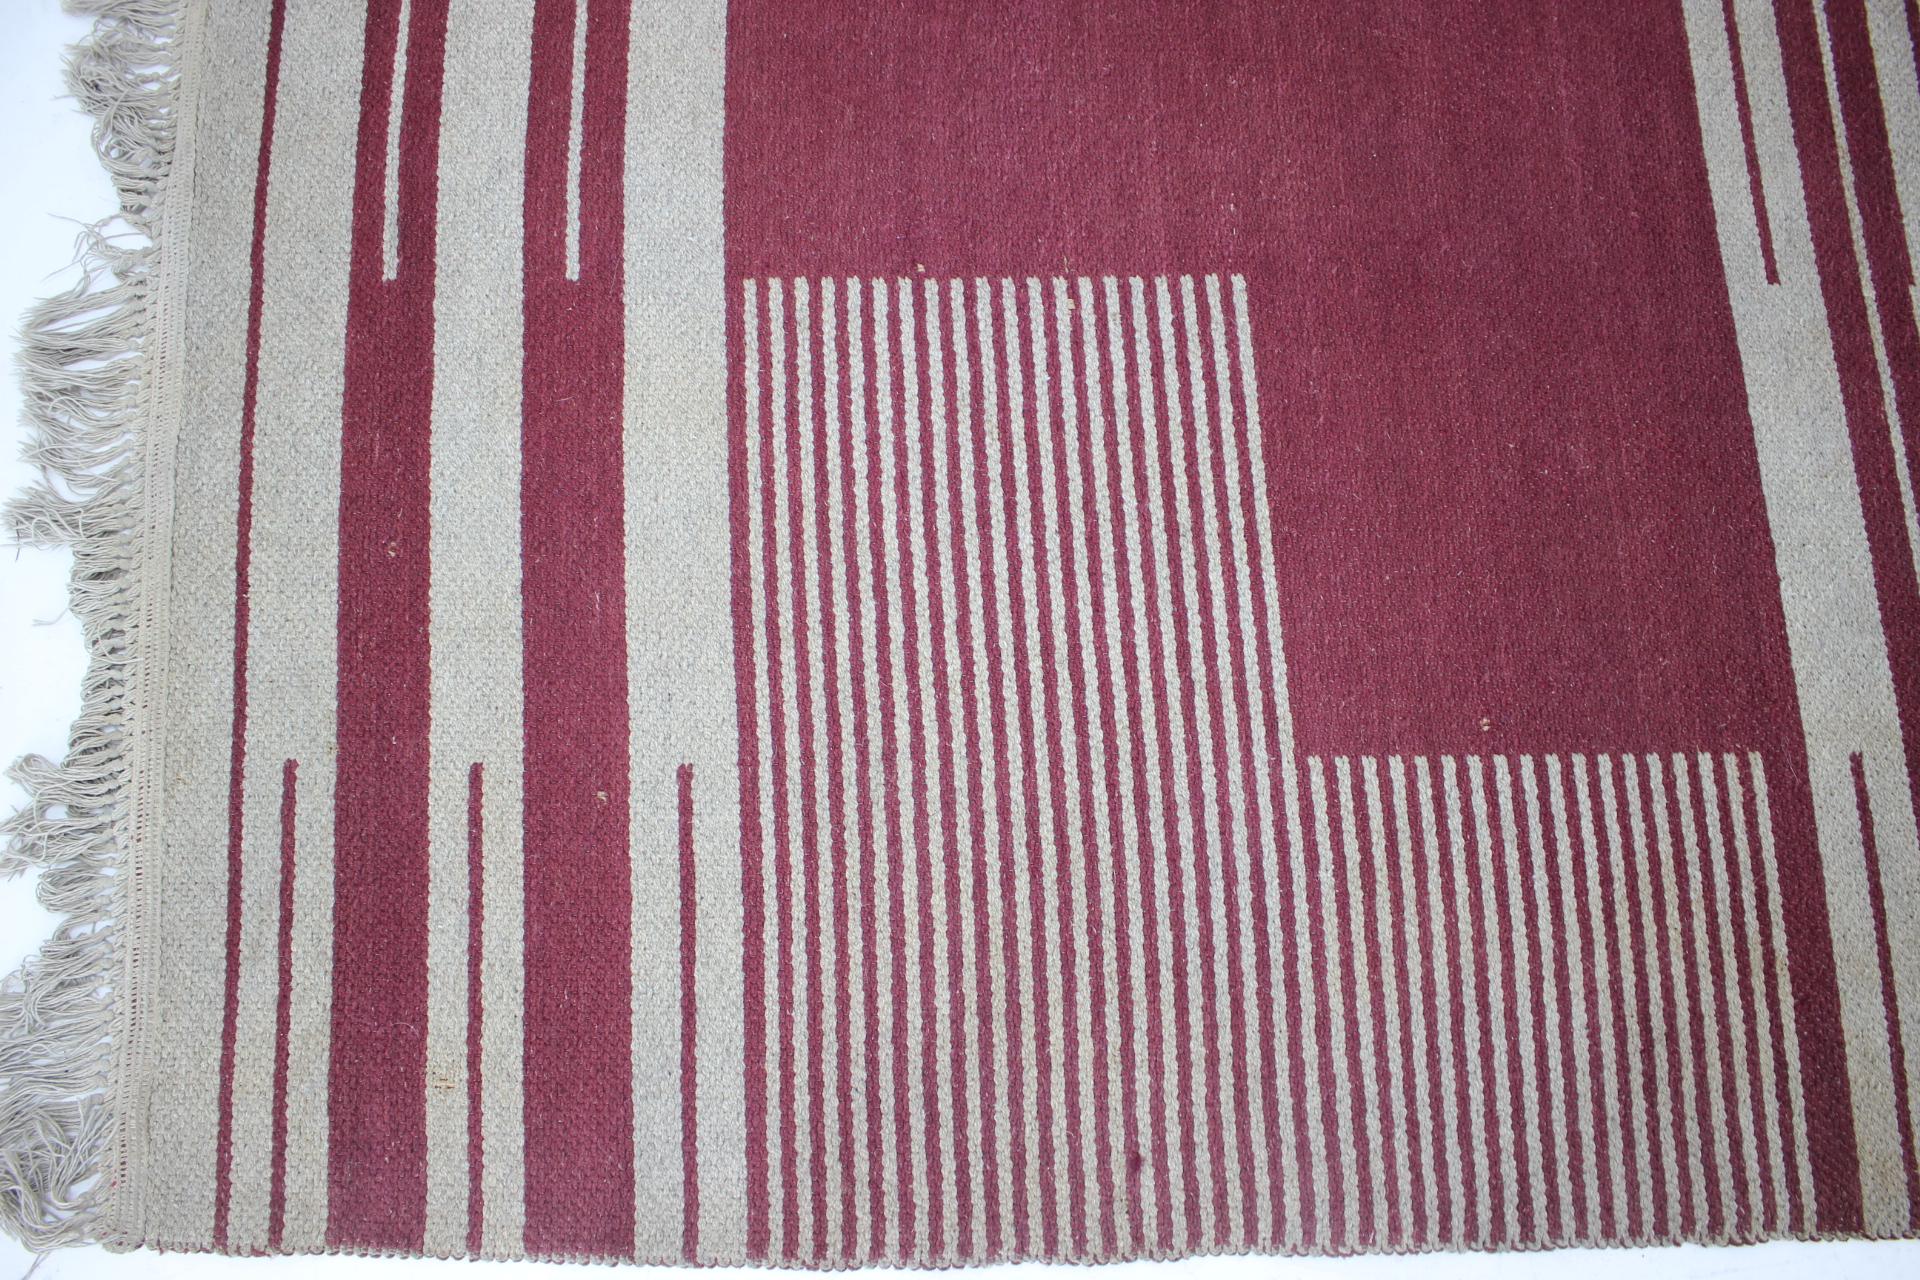 Original Rare Modernist Abstract Geometric Carpet by Antonín Kybal, 1948 In Good Condition For Sale In Praha, CZ